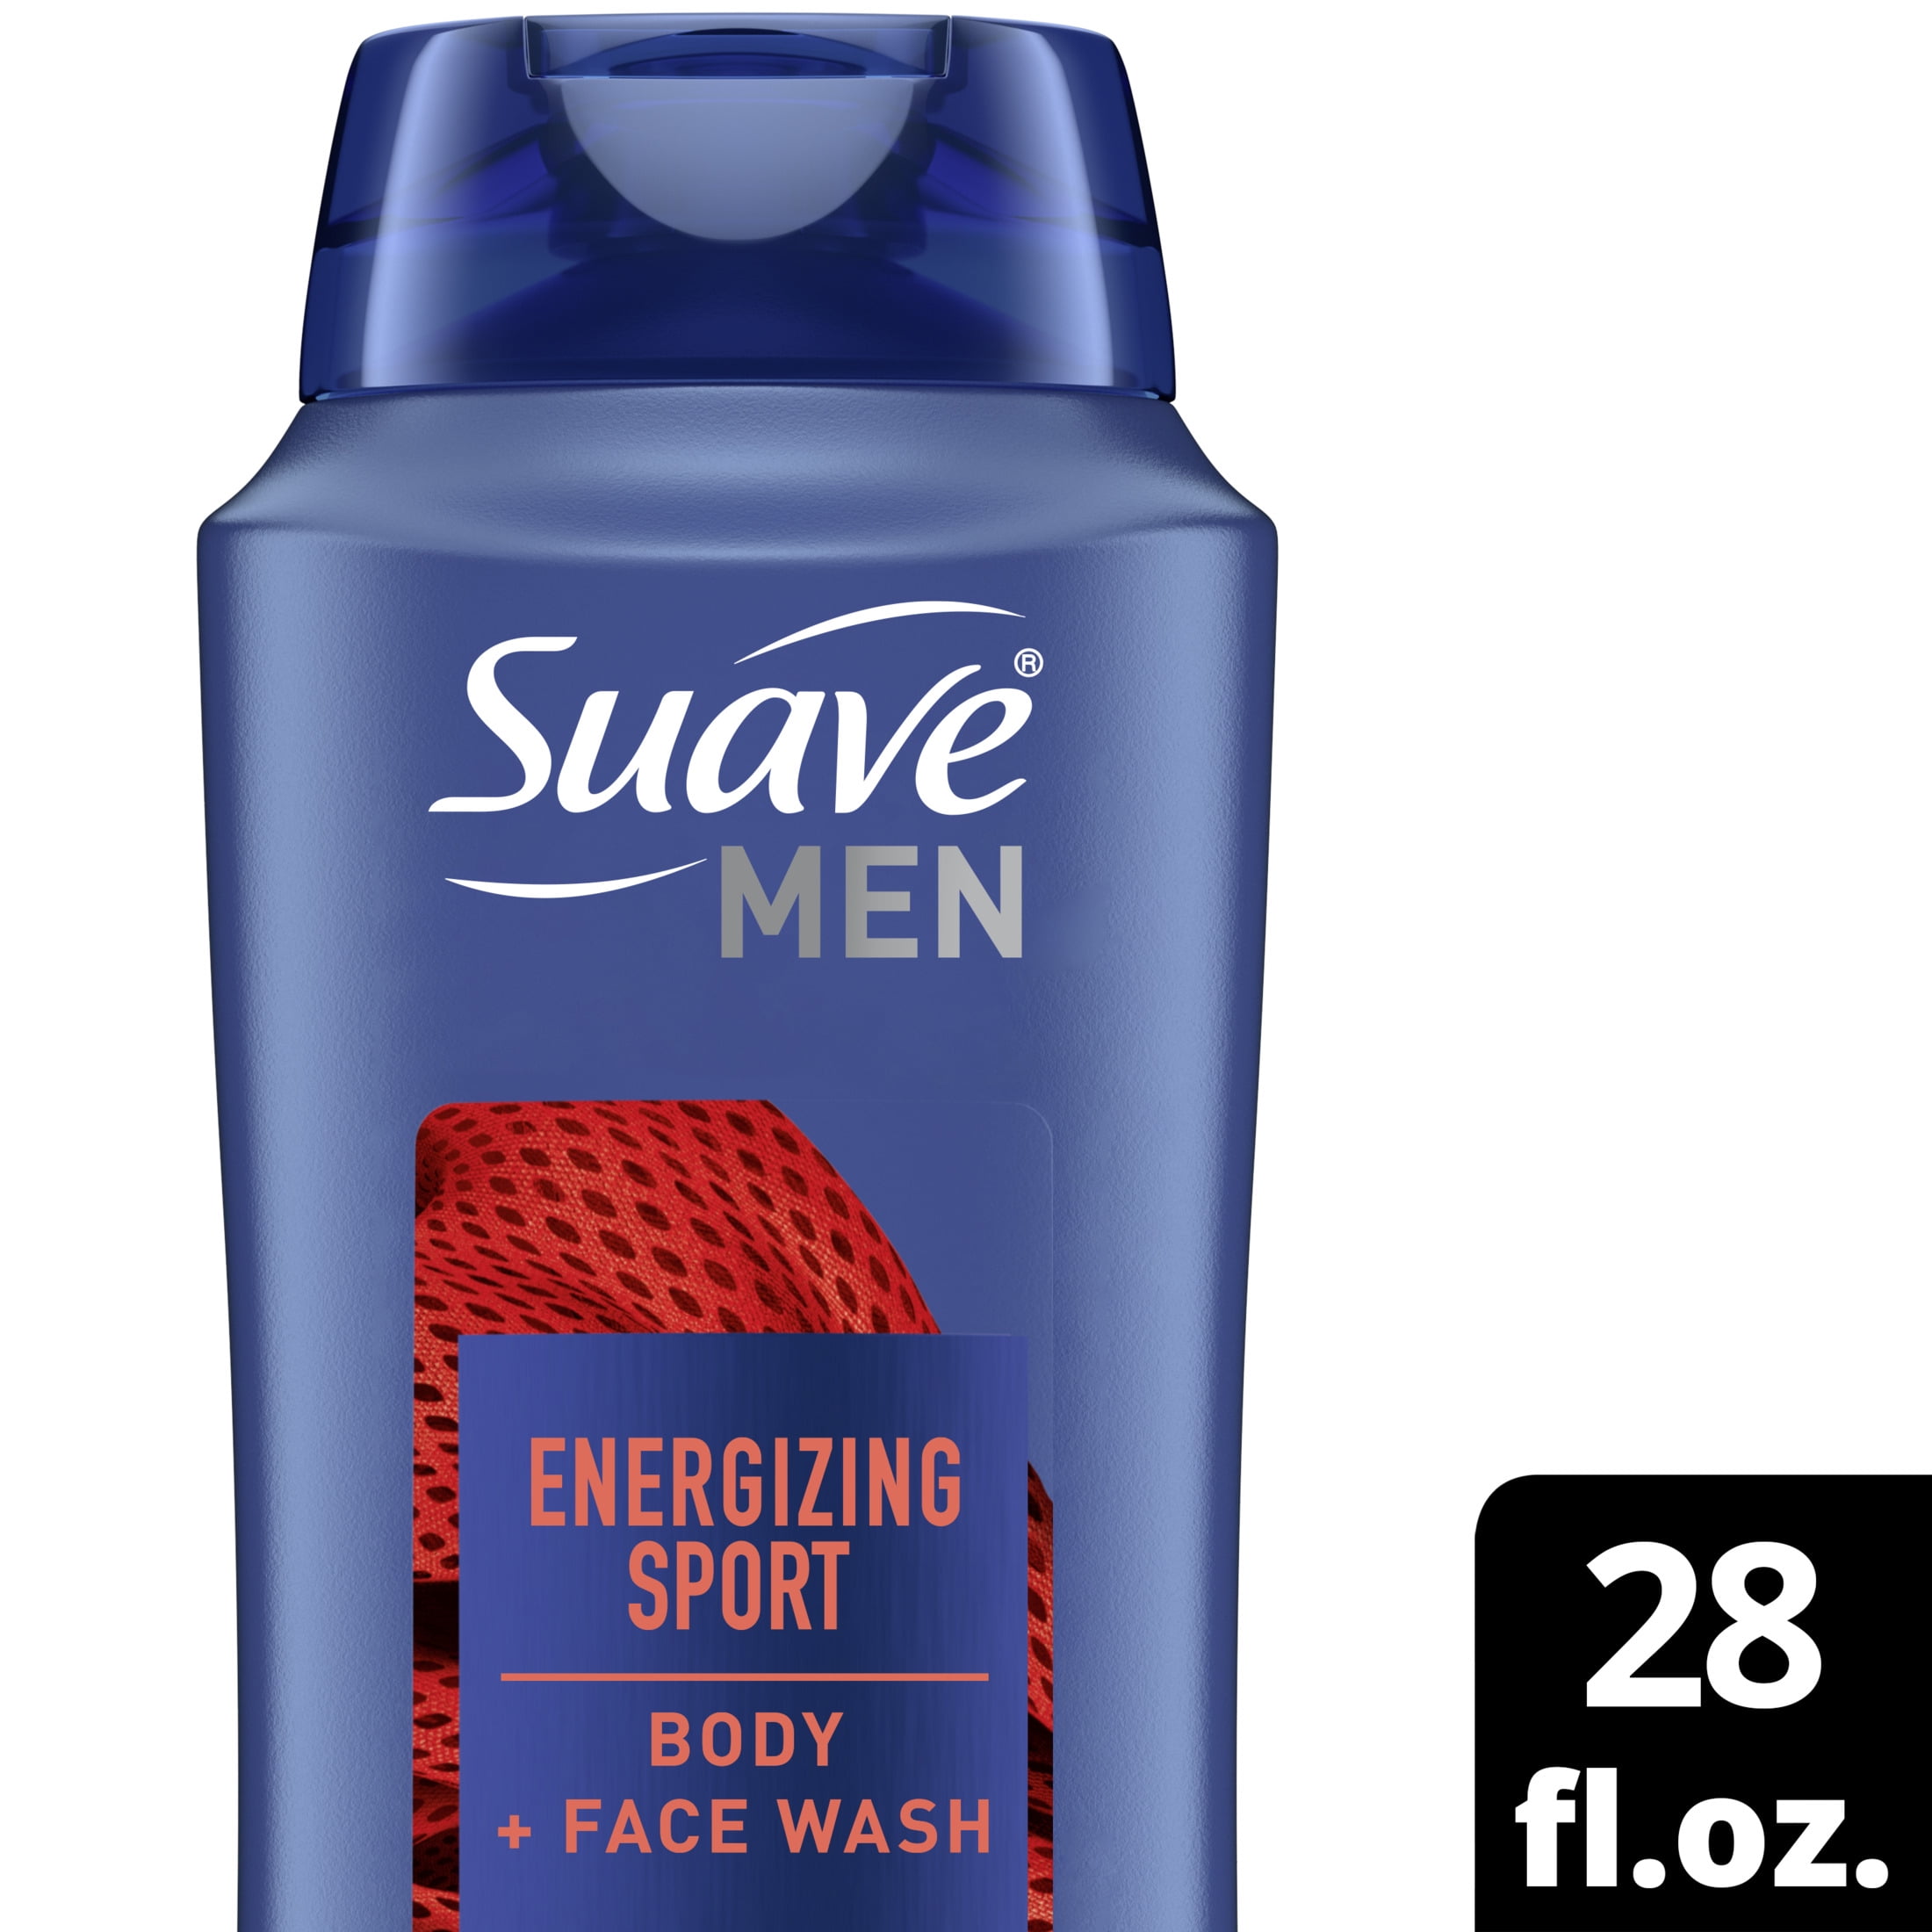 Suave Men Sport Body Wash Fragrance Body Wash and Shower Gel for Everyday Use, 28 oz